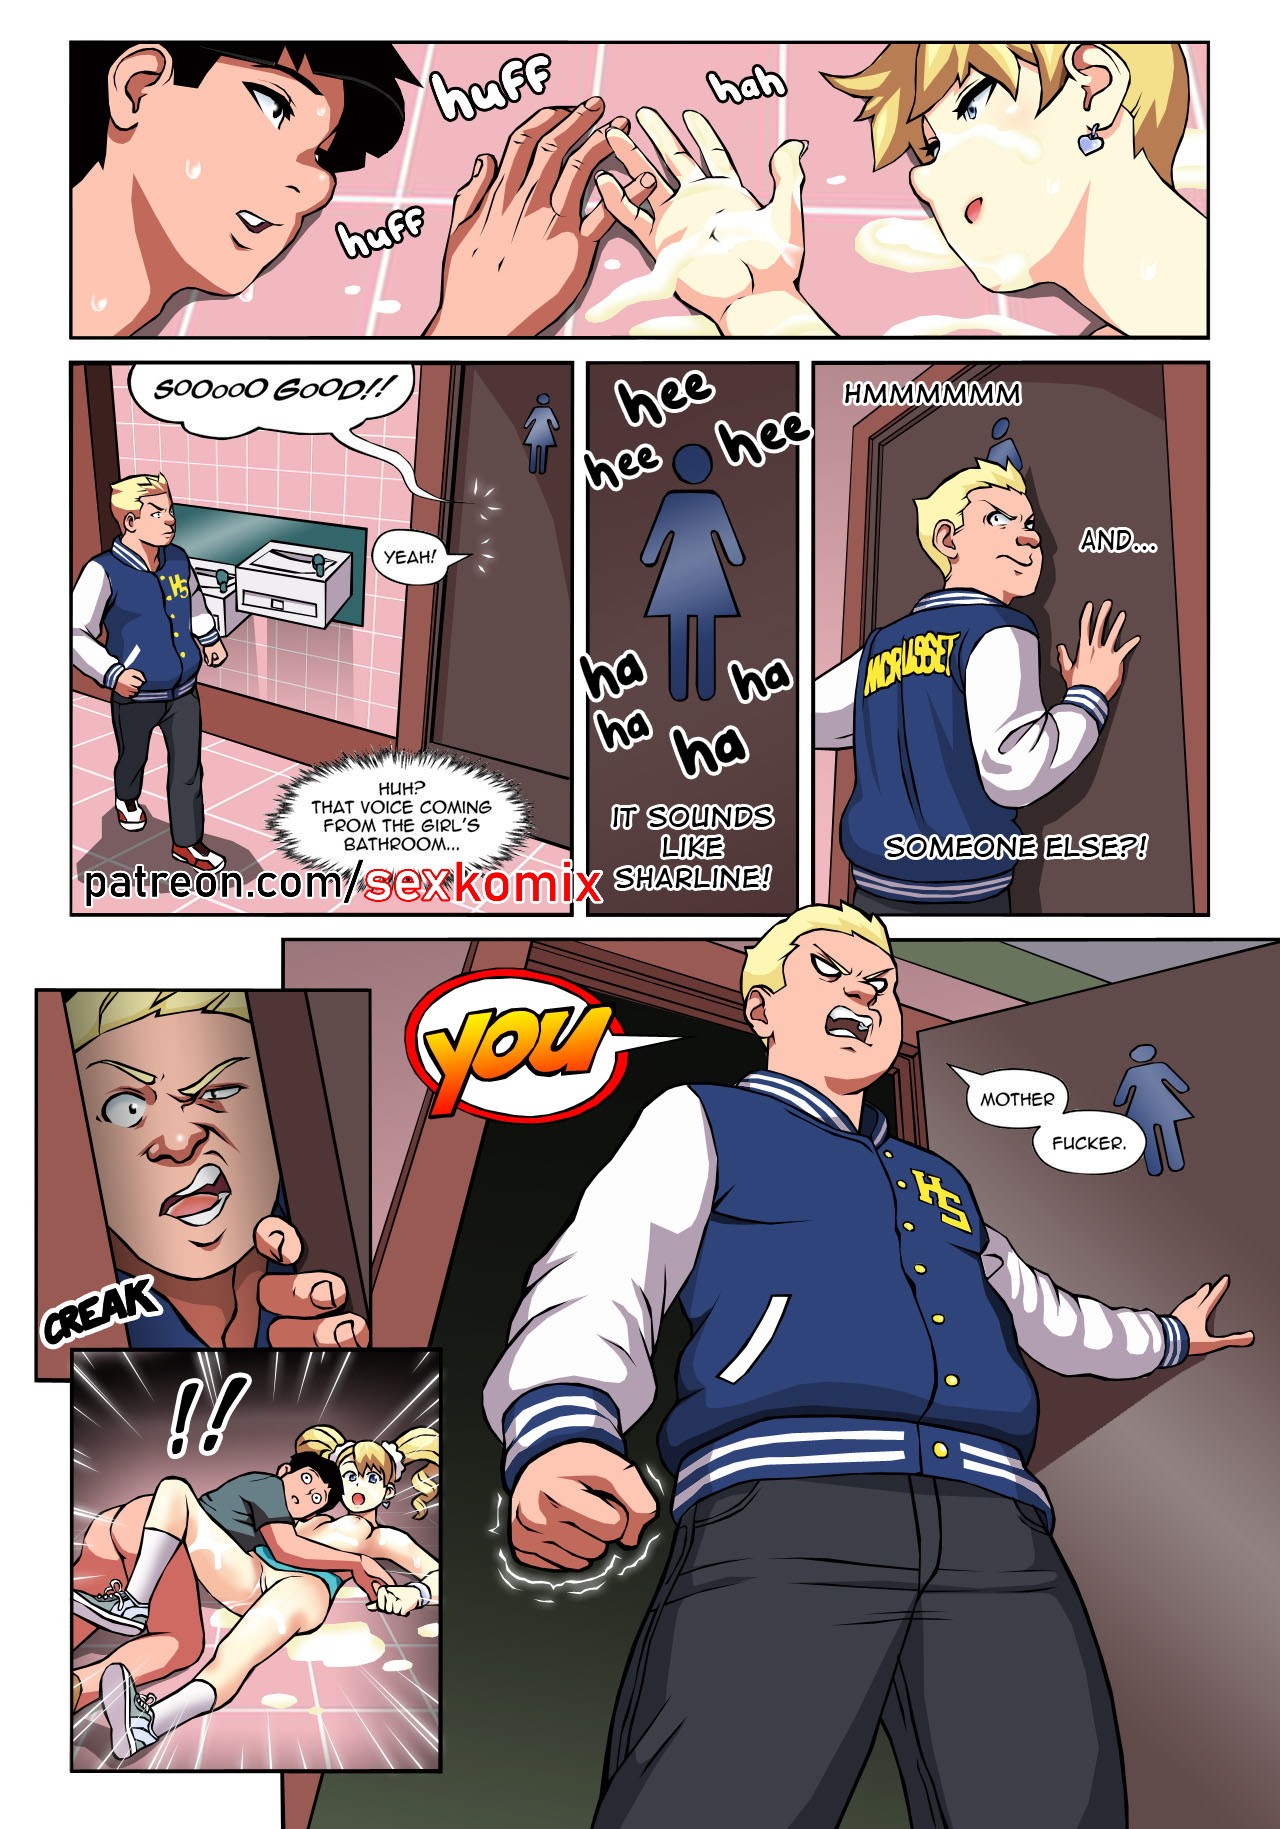 Hot Shit High! - Chapter 1 porn comic picture 23